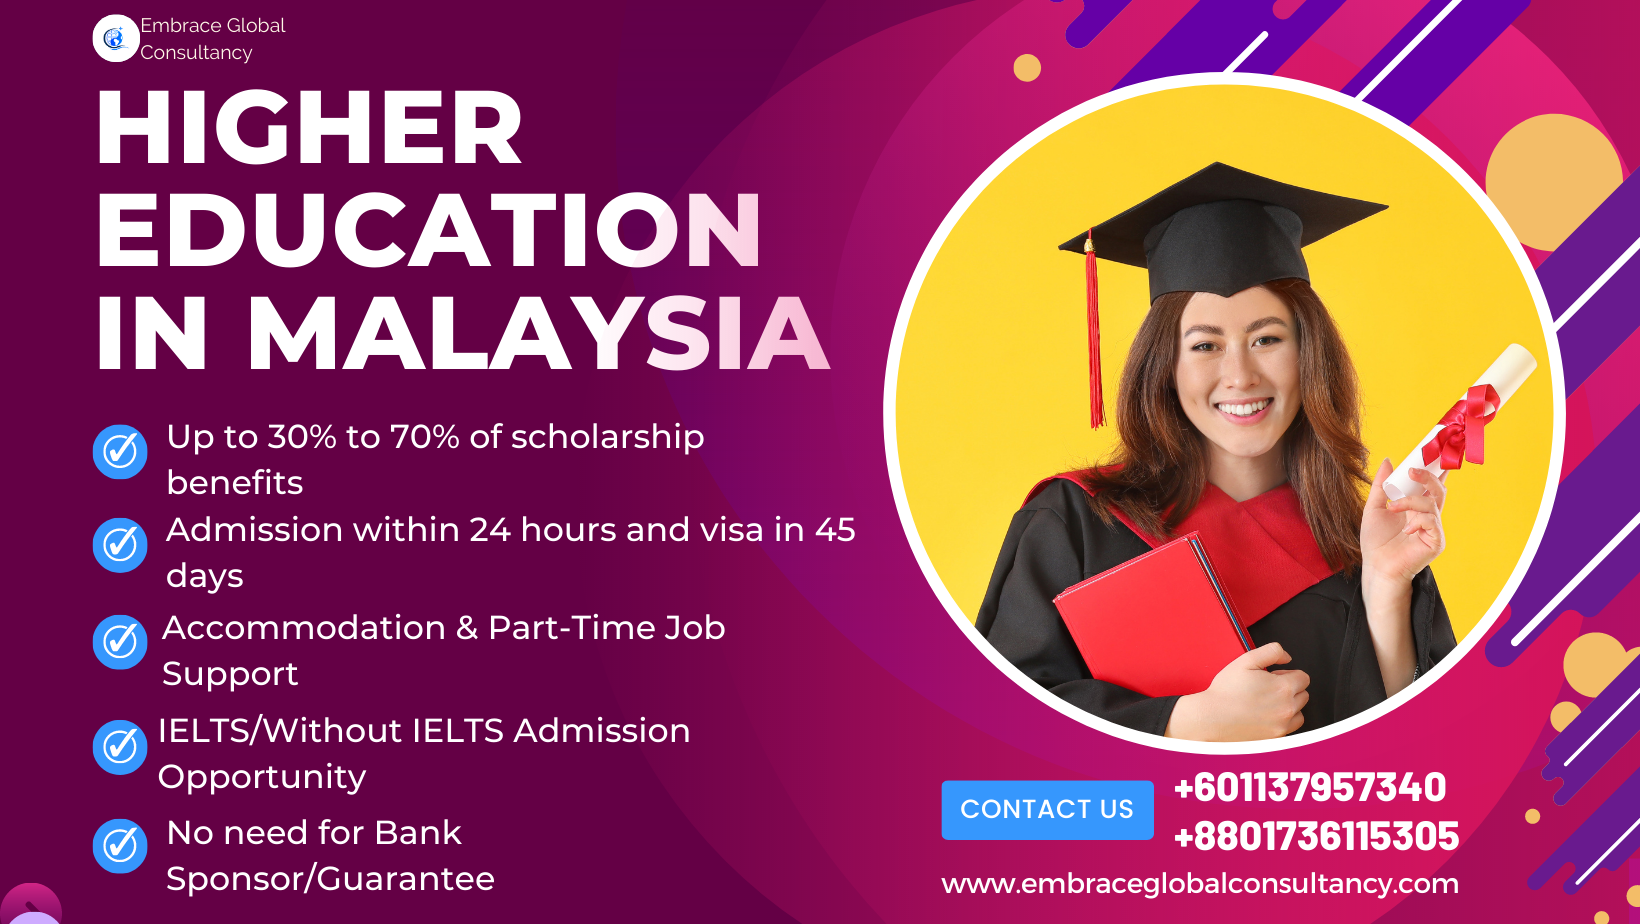 Higher education in Malaysia is top notch and affordable